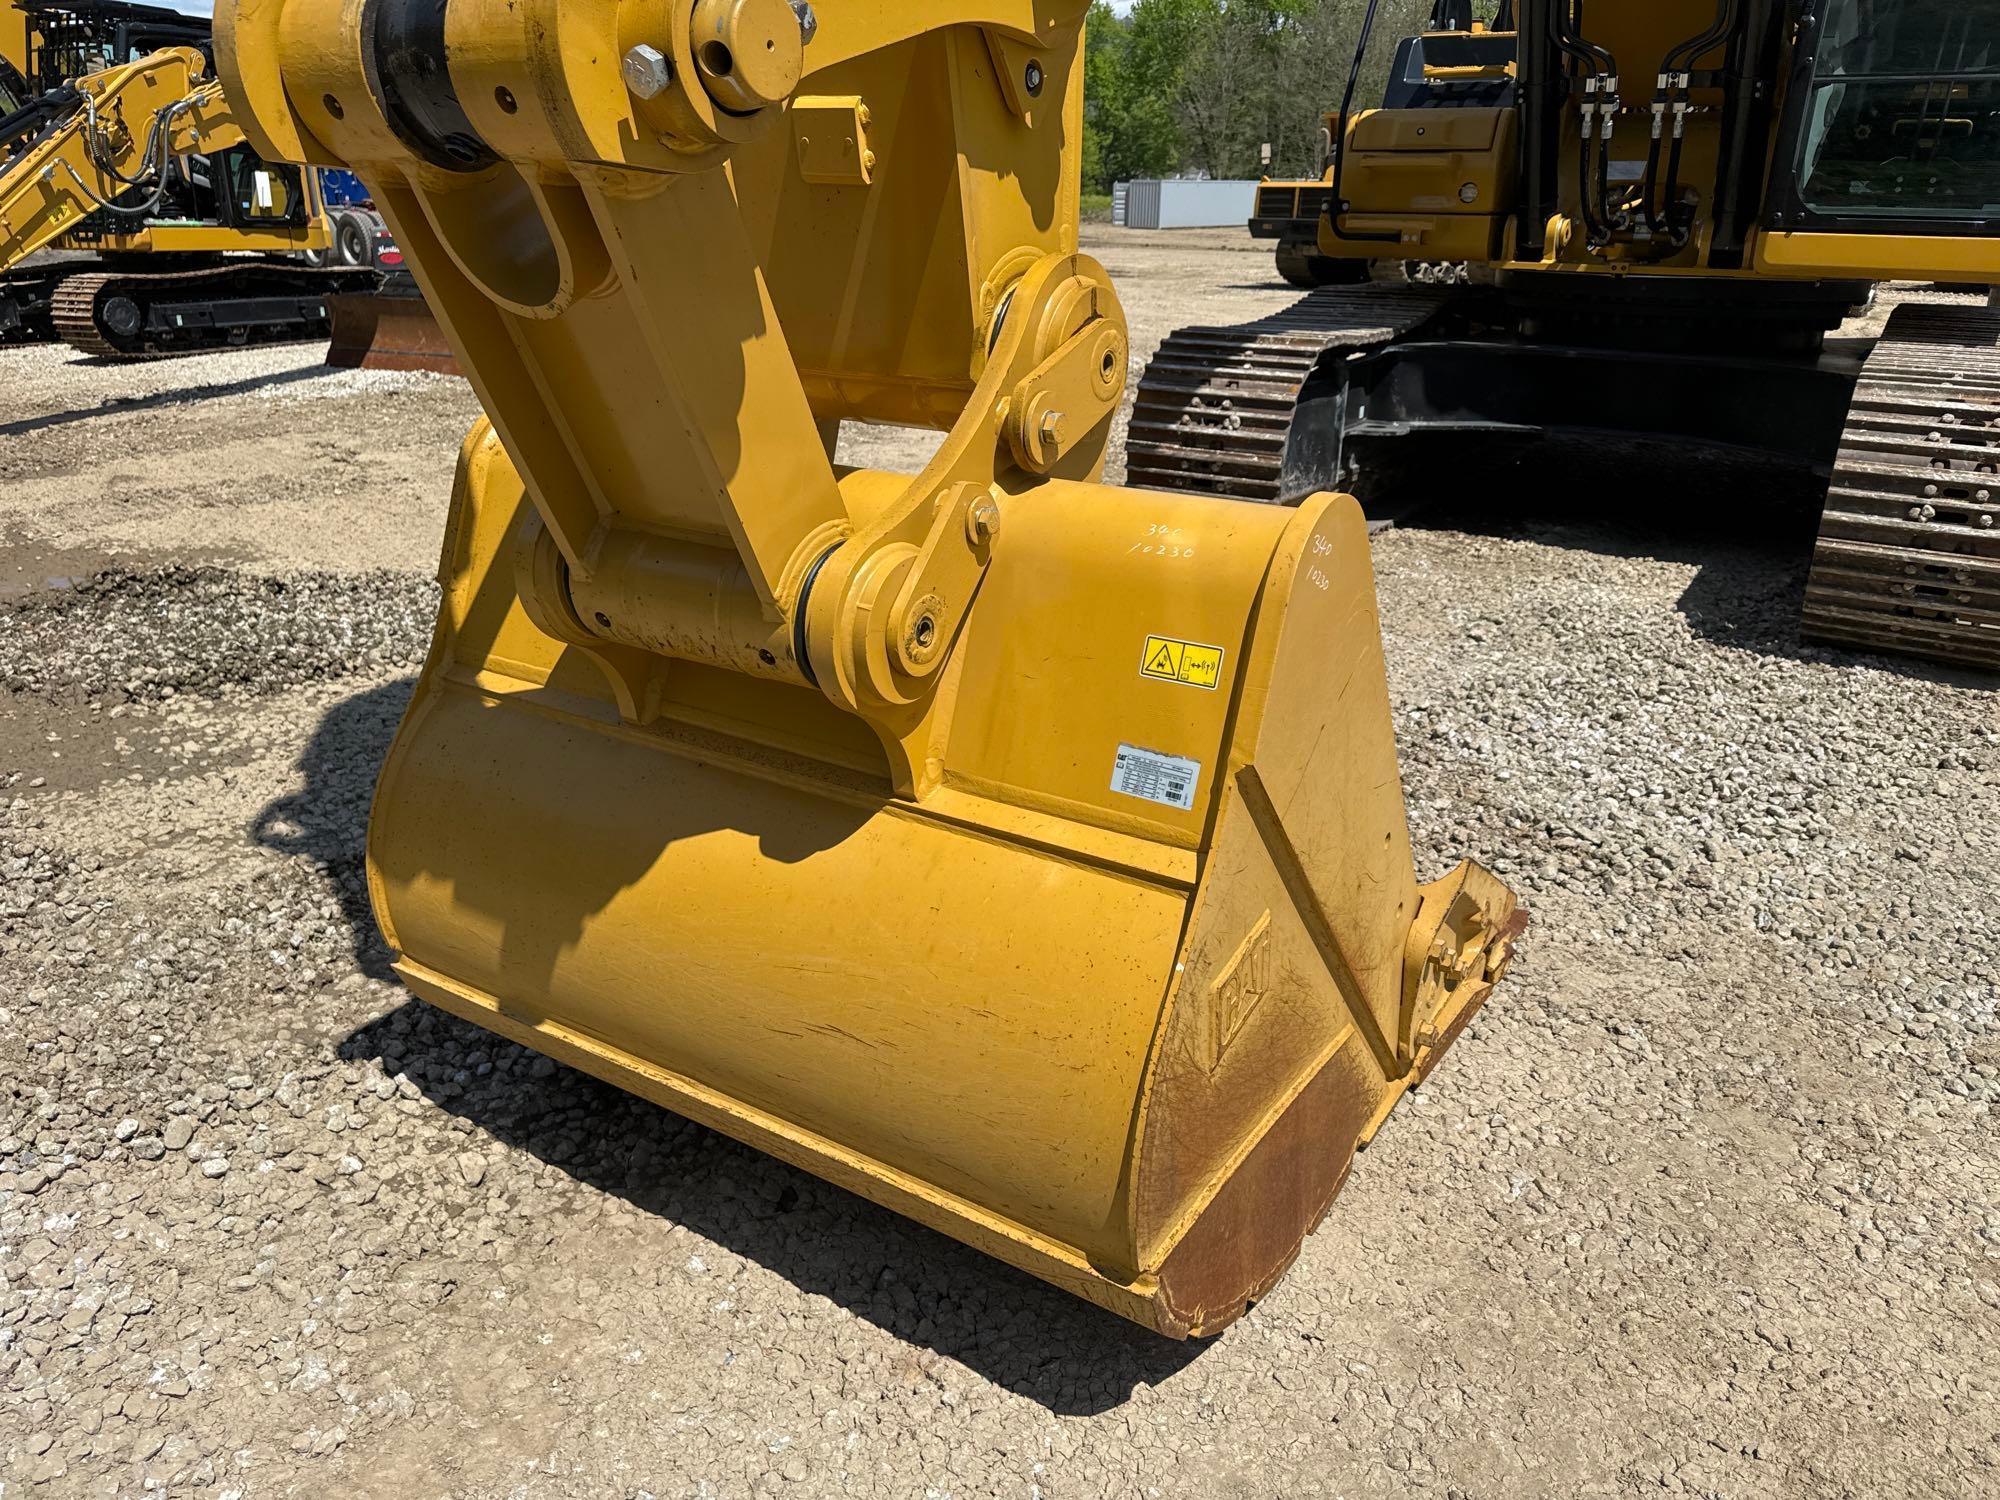 2023 CAT 340 HYDRAULIC EXCAVATOR SN 10230 powered by Cat diesel engine, equipped with Cab, air,